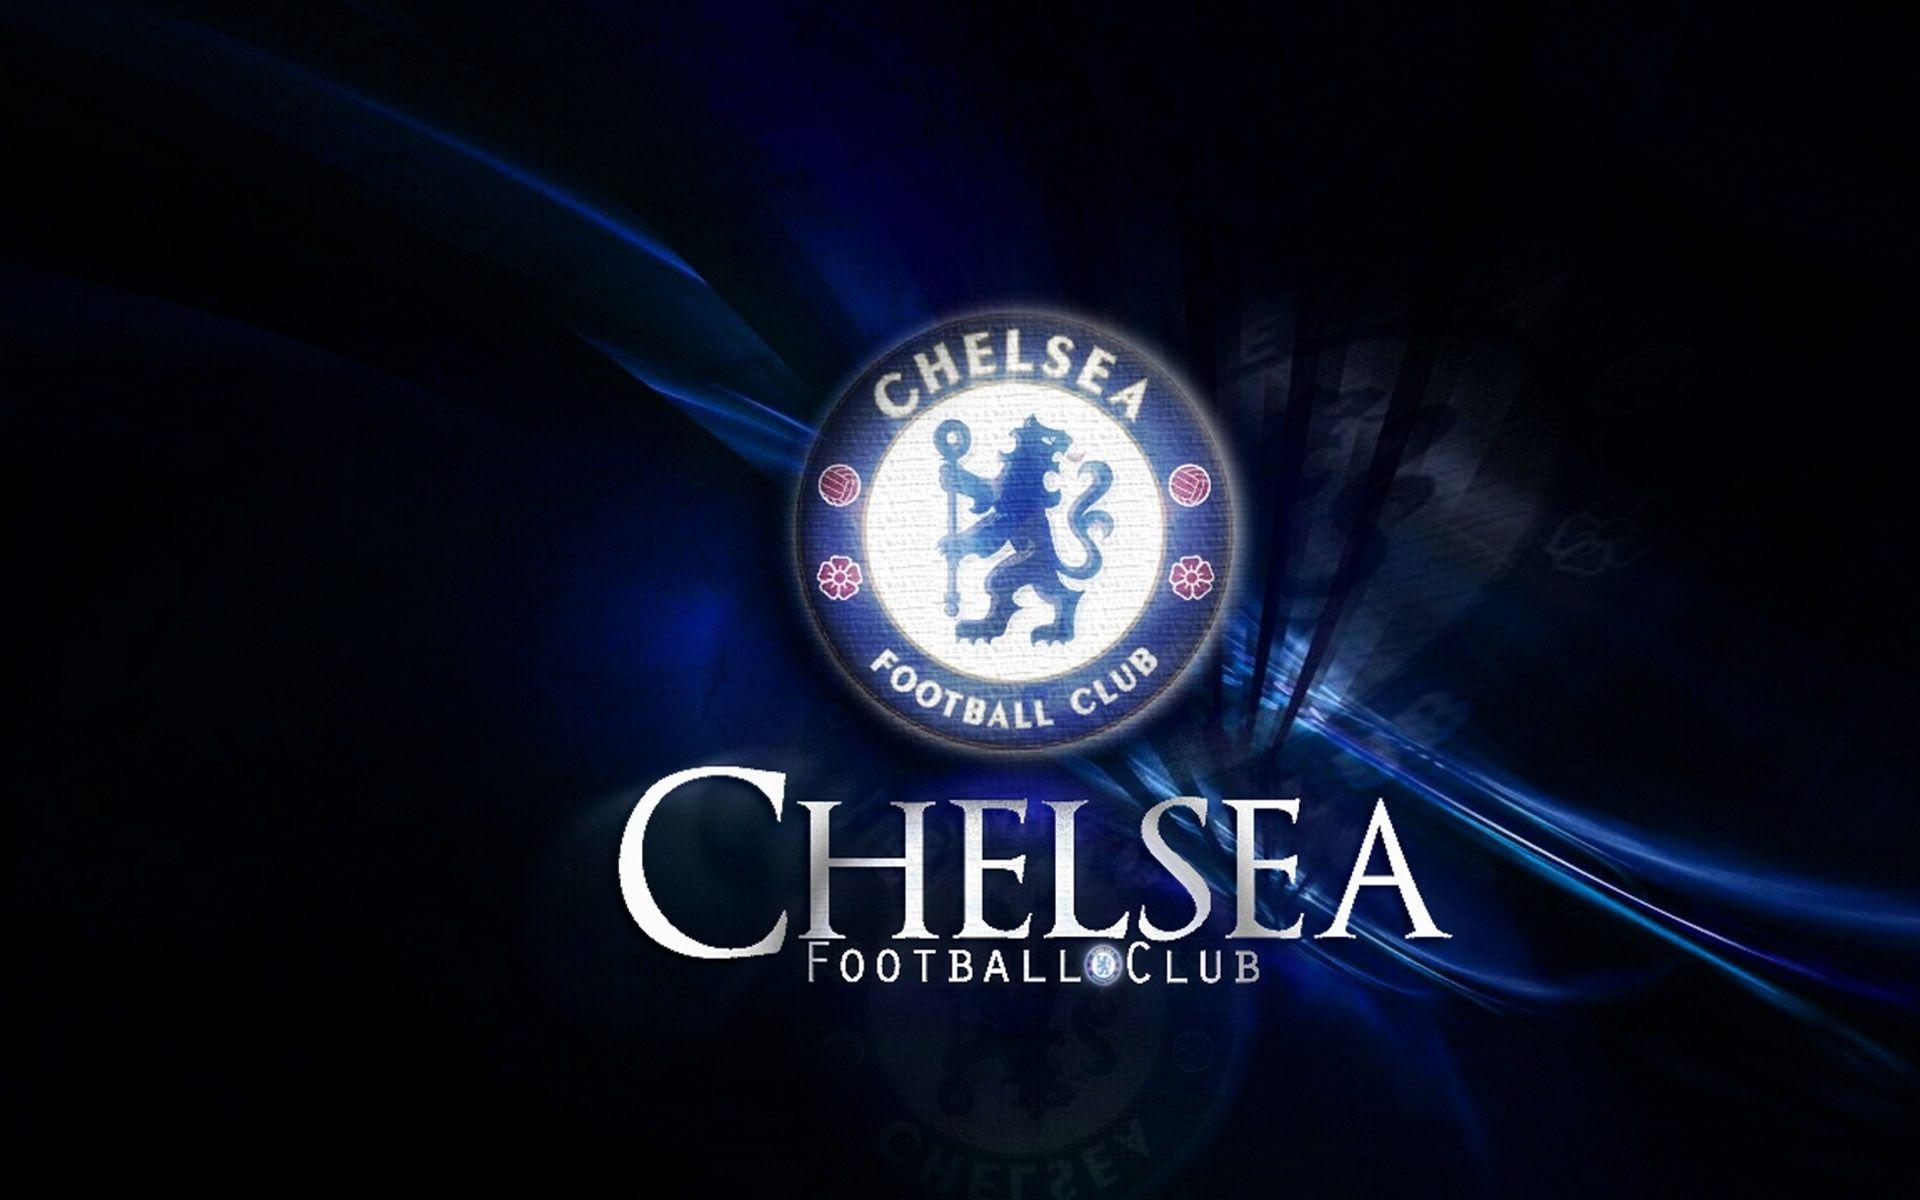 High Quality Chelsea Football Club Wallpaper. Full HD Picture